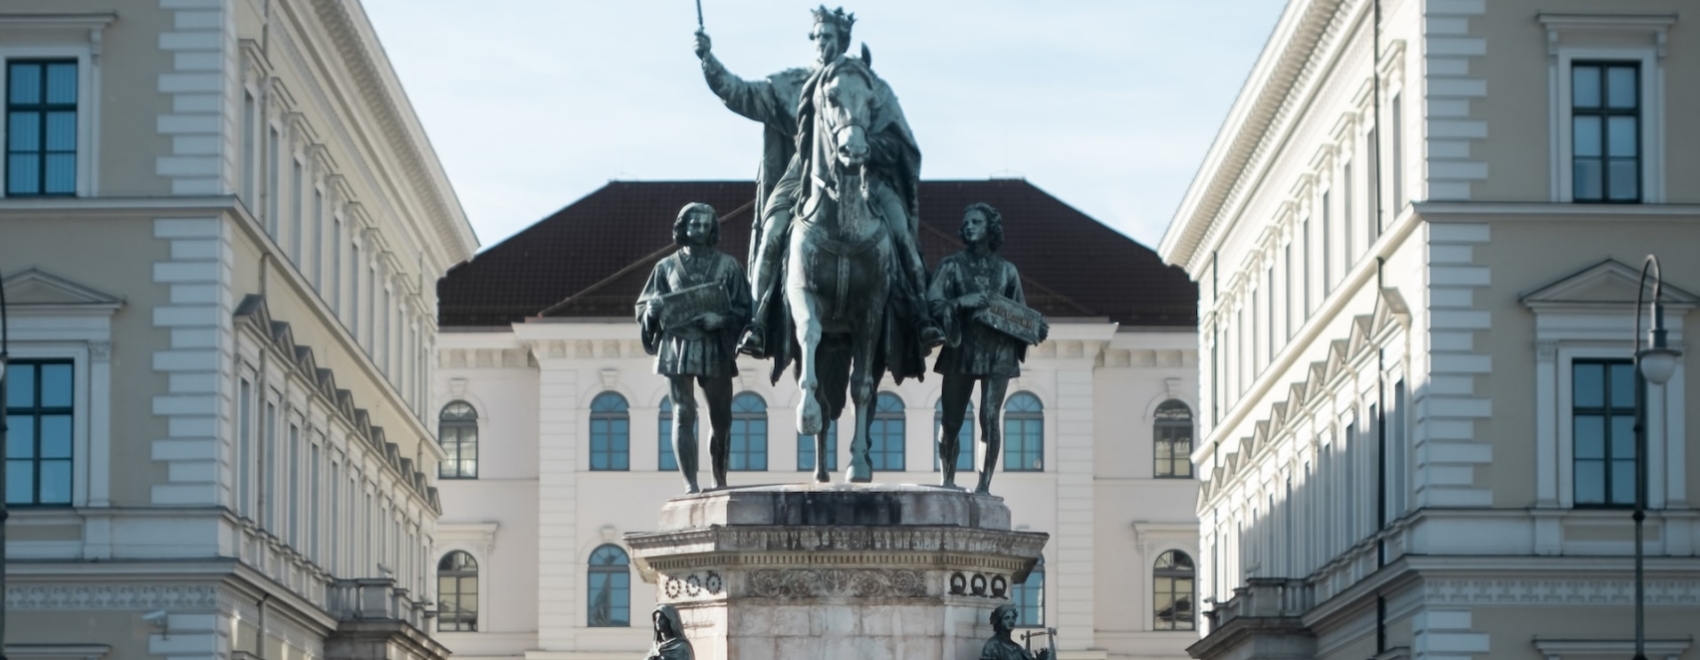 Statue of King Ludwig I. of Bavaria in Munich